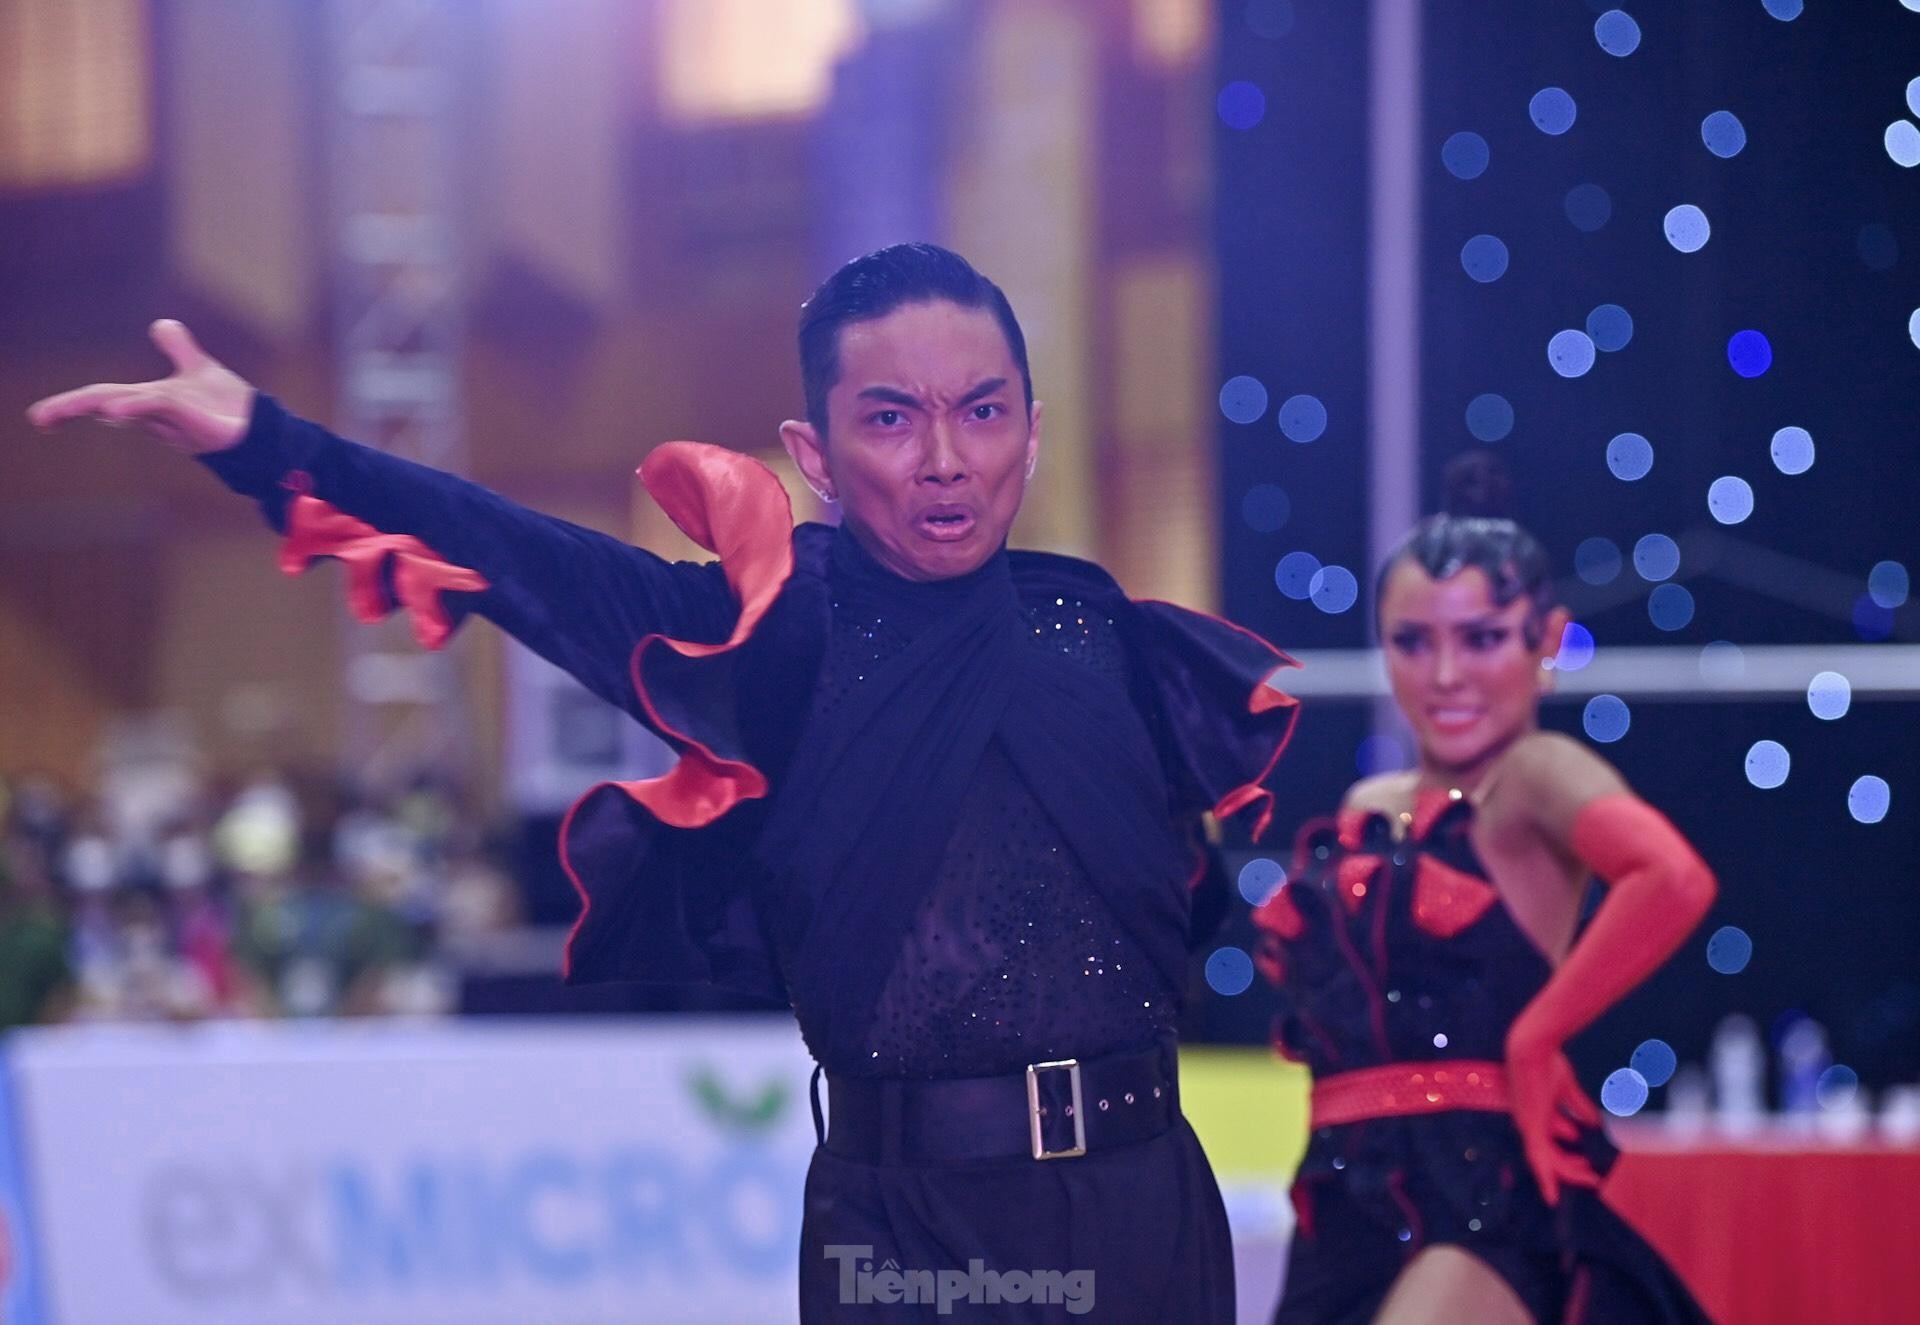 Watch the mesmerizing dance that helped Dancesport Vietnam win 5 gold medals at the 31st SEA Games - Photo 7.